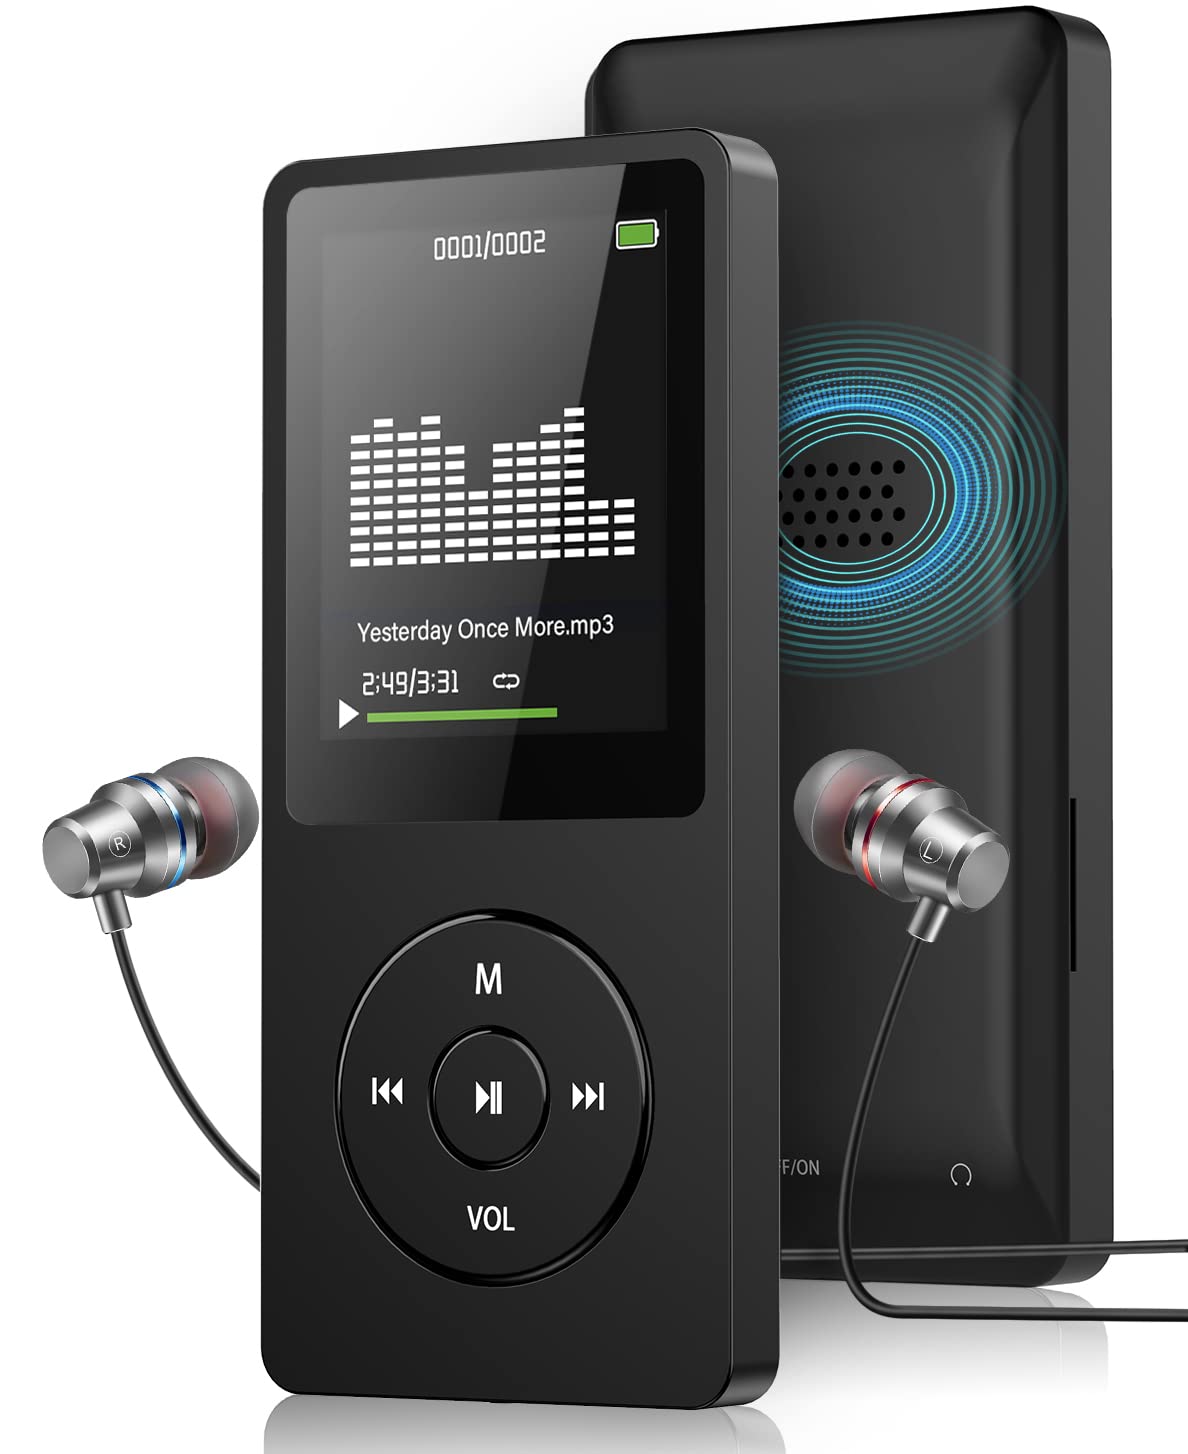 64GB MP3 Player with FM Radio and Voice Recorder, Ultra Slim Music Player with Video Play Text Reading and Build-in Speaker Support up to 128GB, Earphone Included (Black)